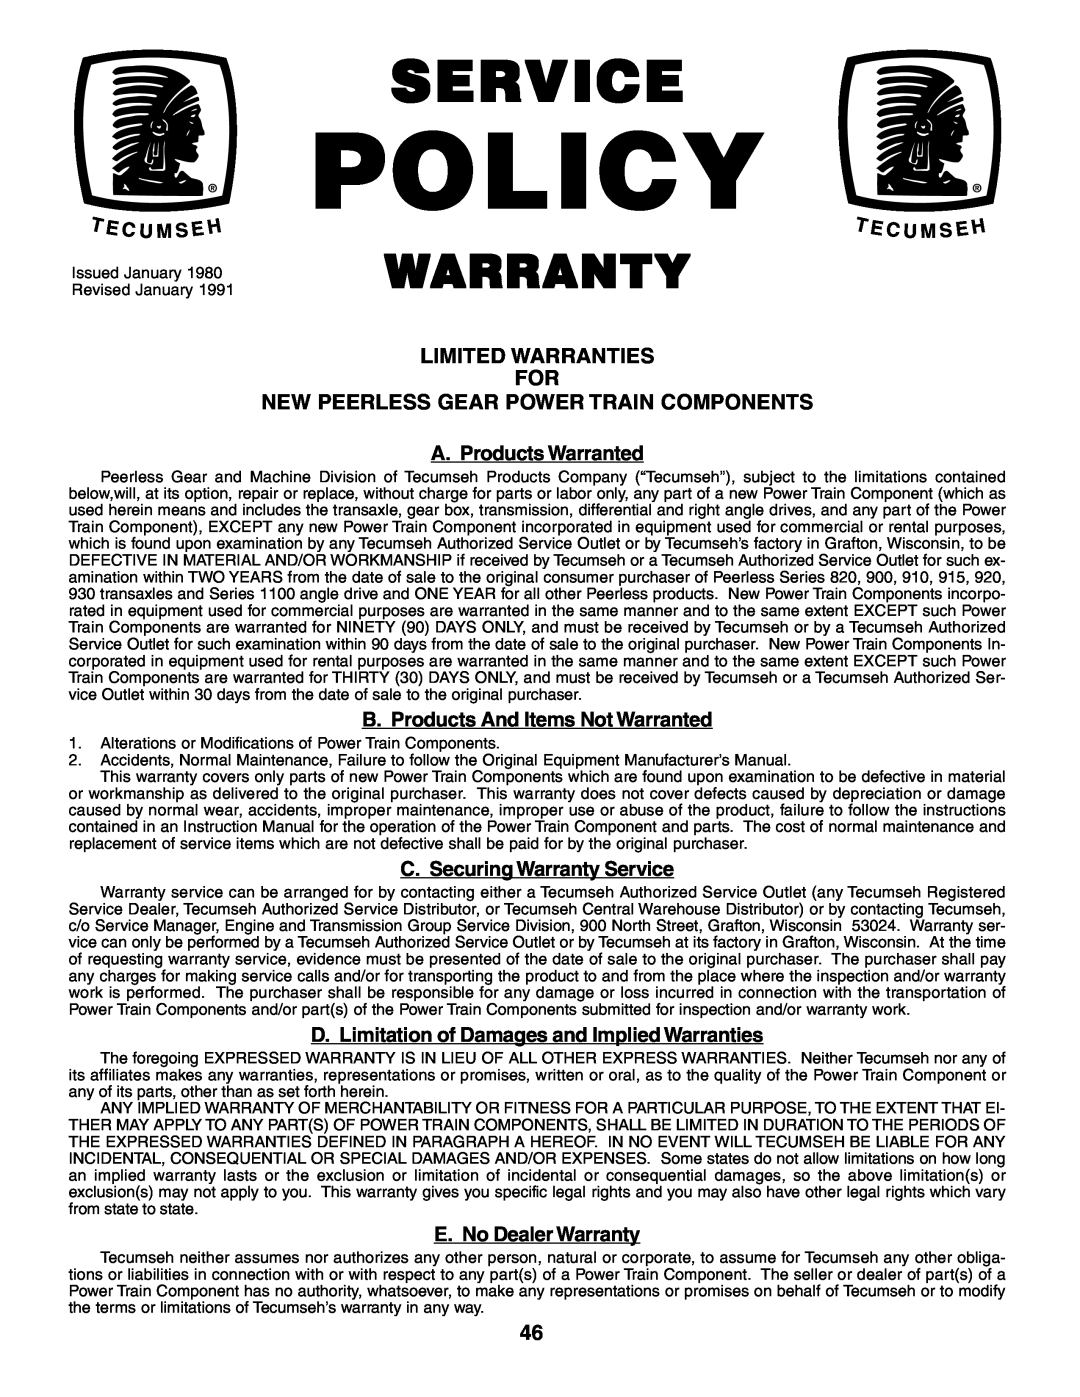 Poulan PC14542D owner manual Policy, Service, Warranty, Limited Warranties 